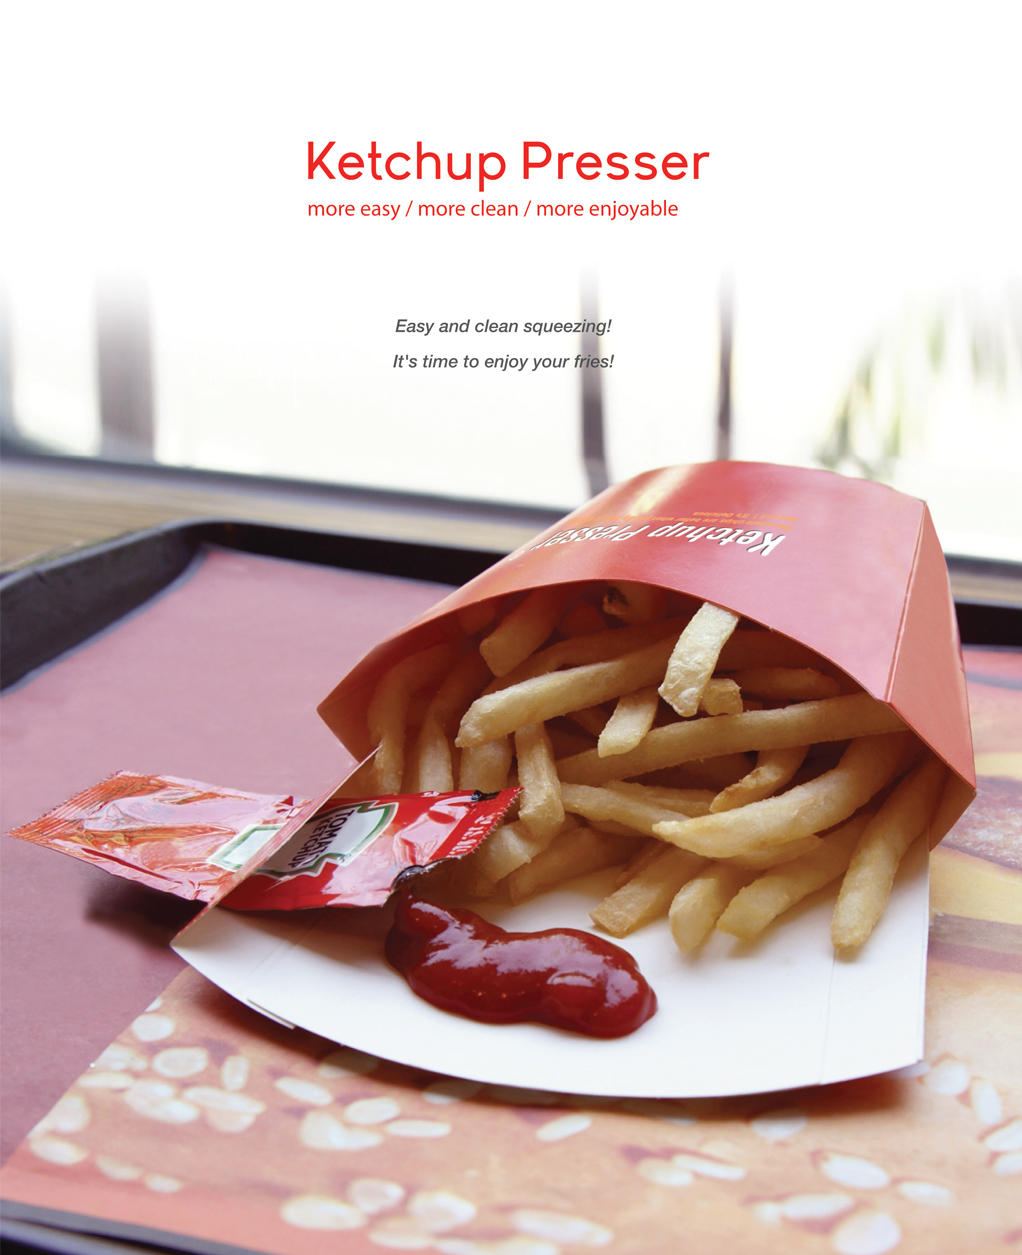 french fries SKY pinup kaid fry Fast food package design  ketchup weave clean Presser cola ketchup presser